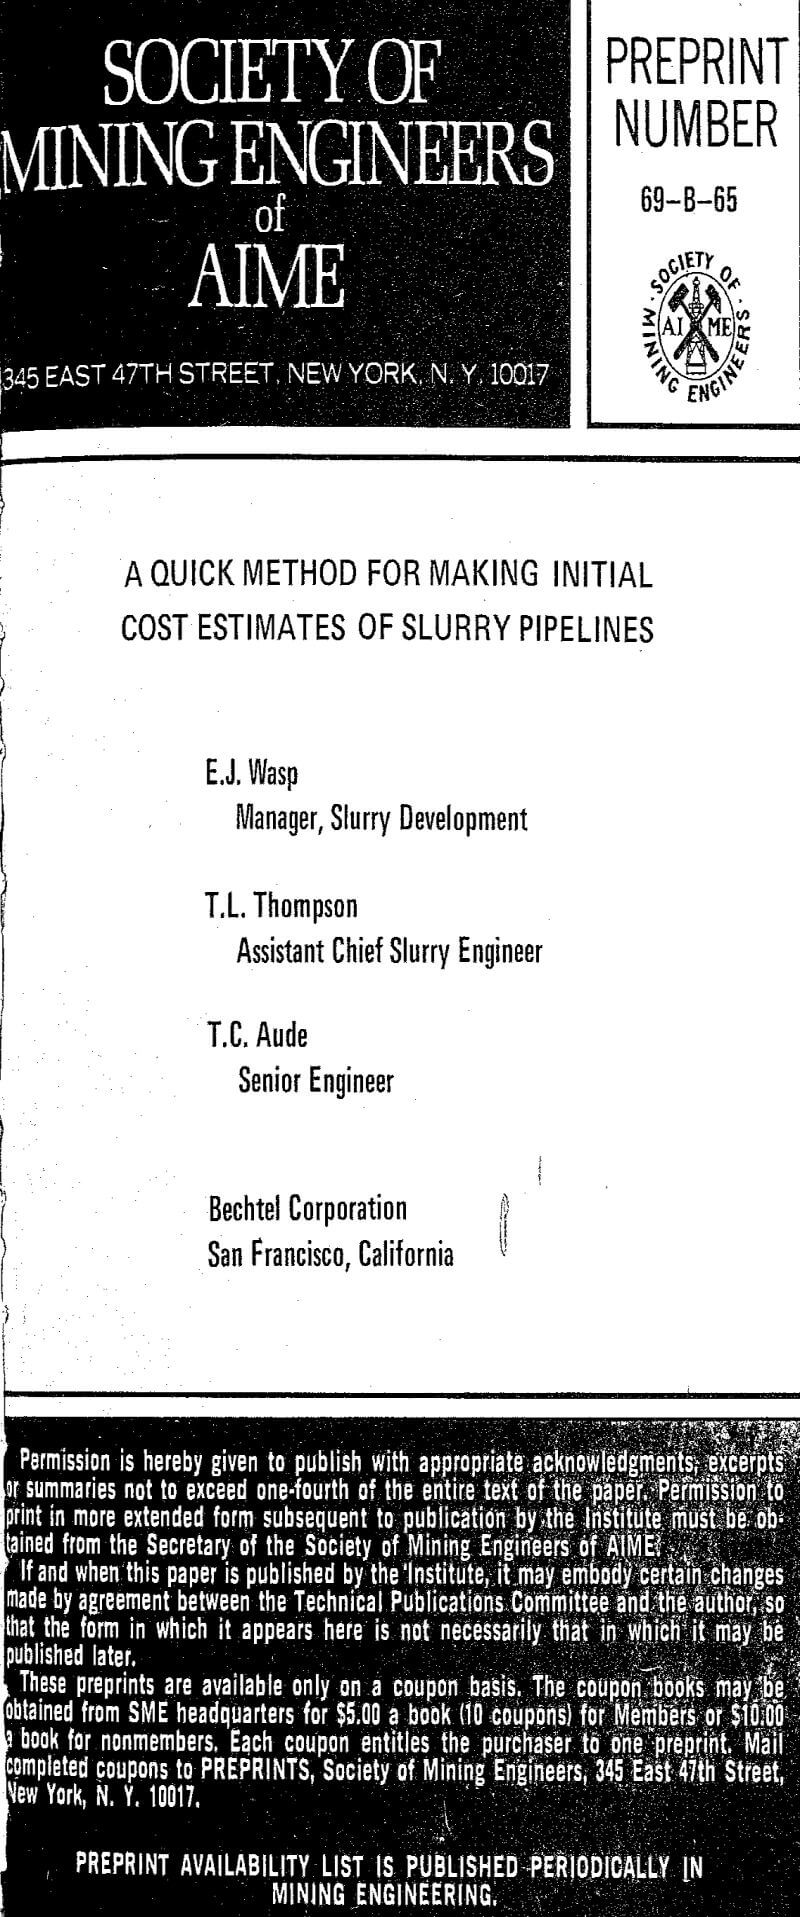 a quick method for making initial cost estimates of slurry pipelines